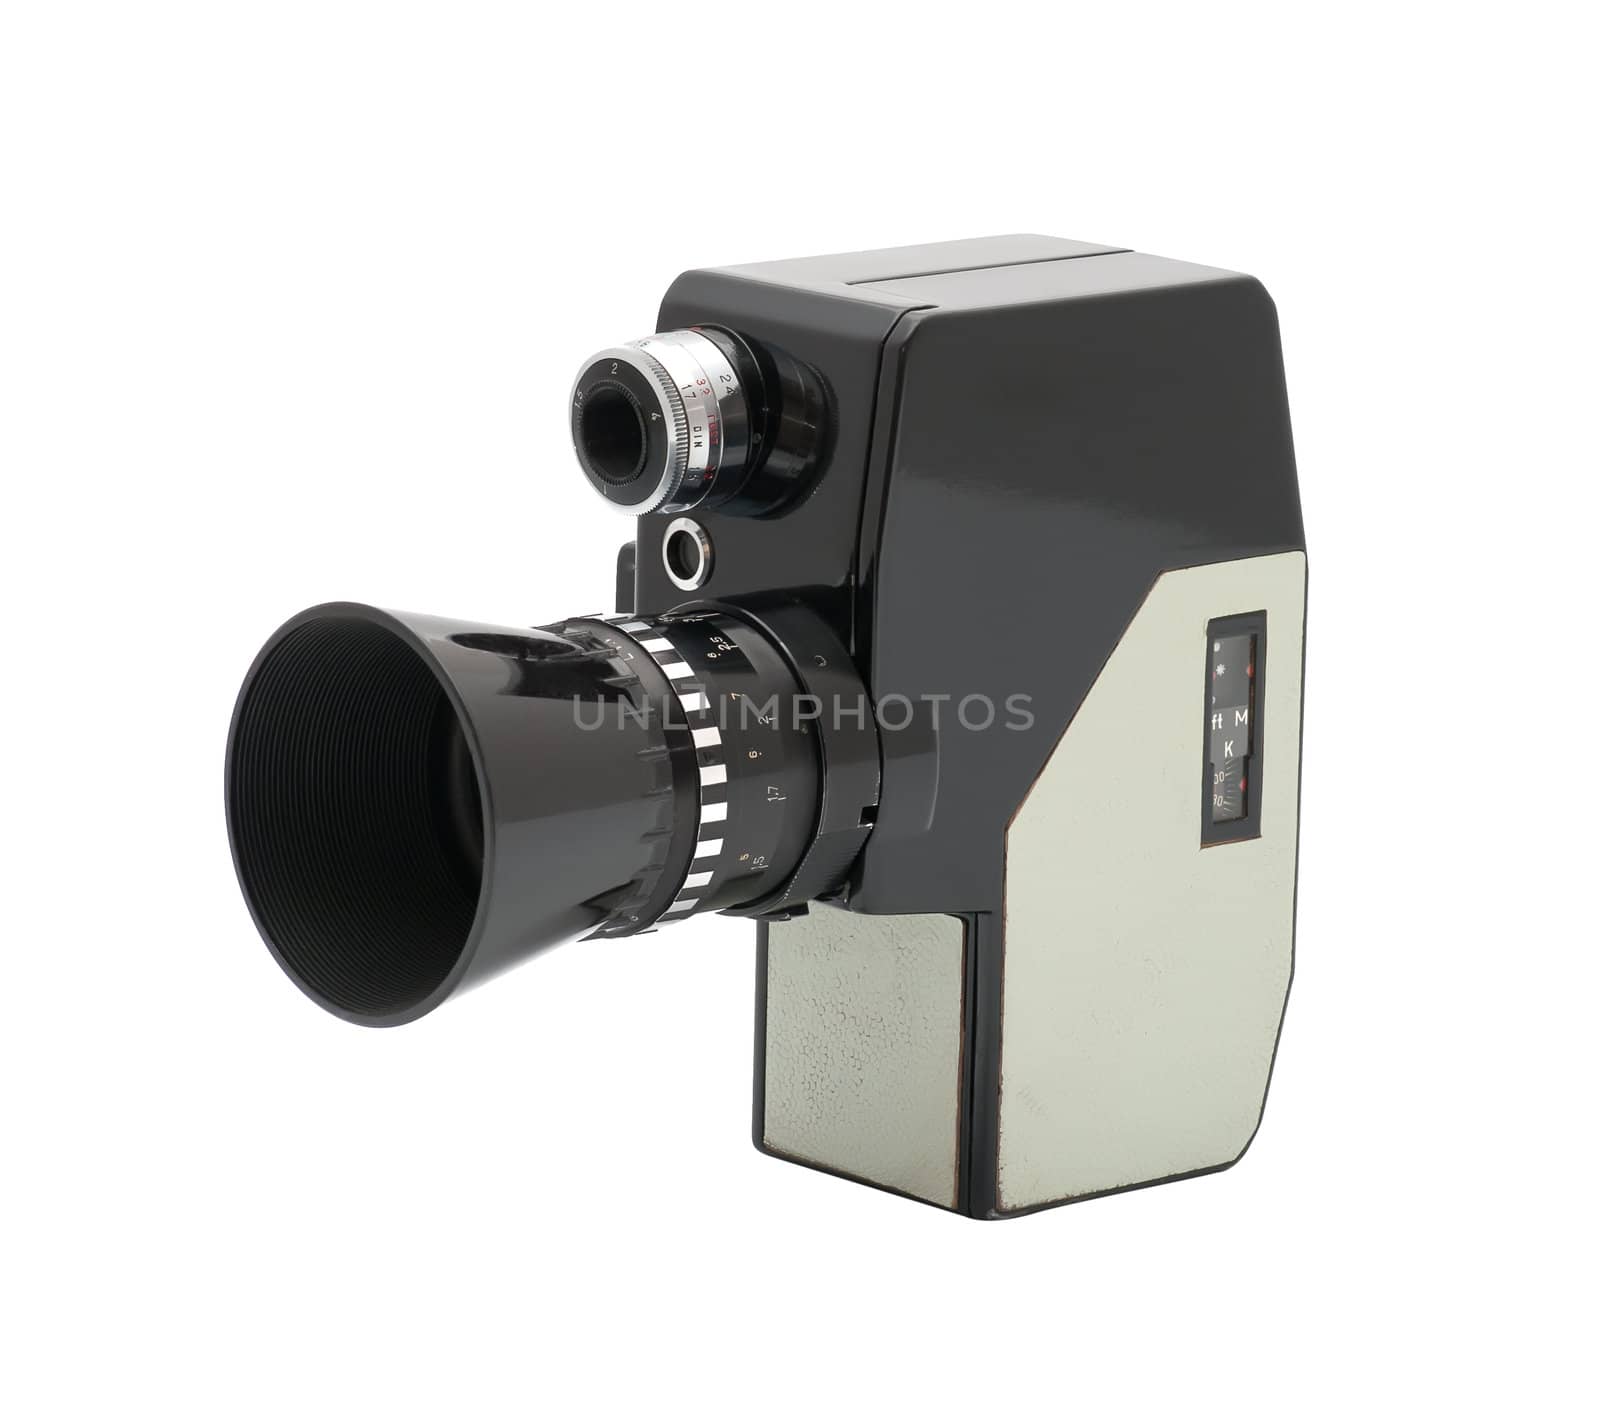 The old 8 mm movie camera is isolated on a white background.